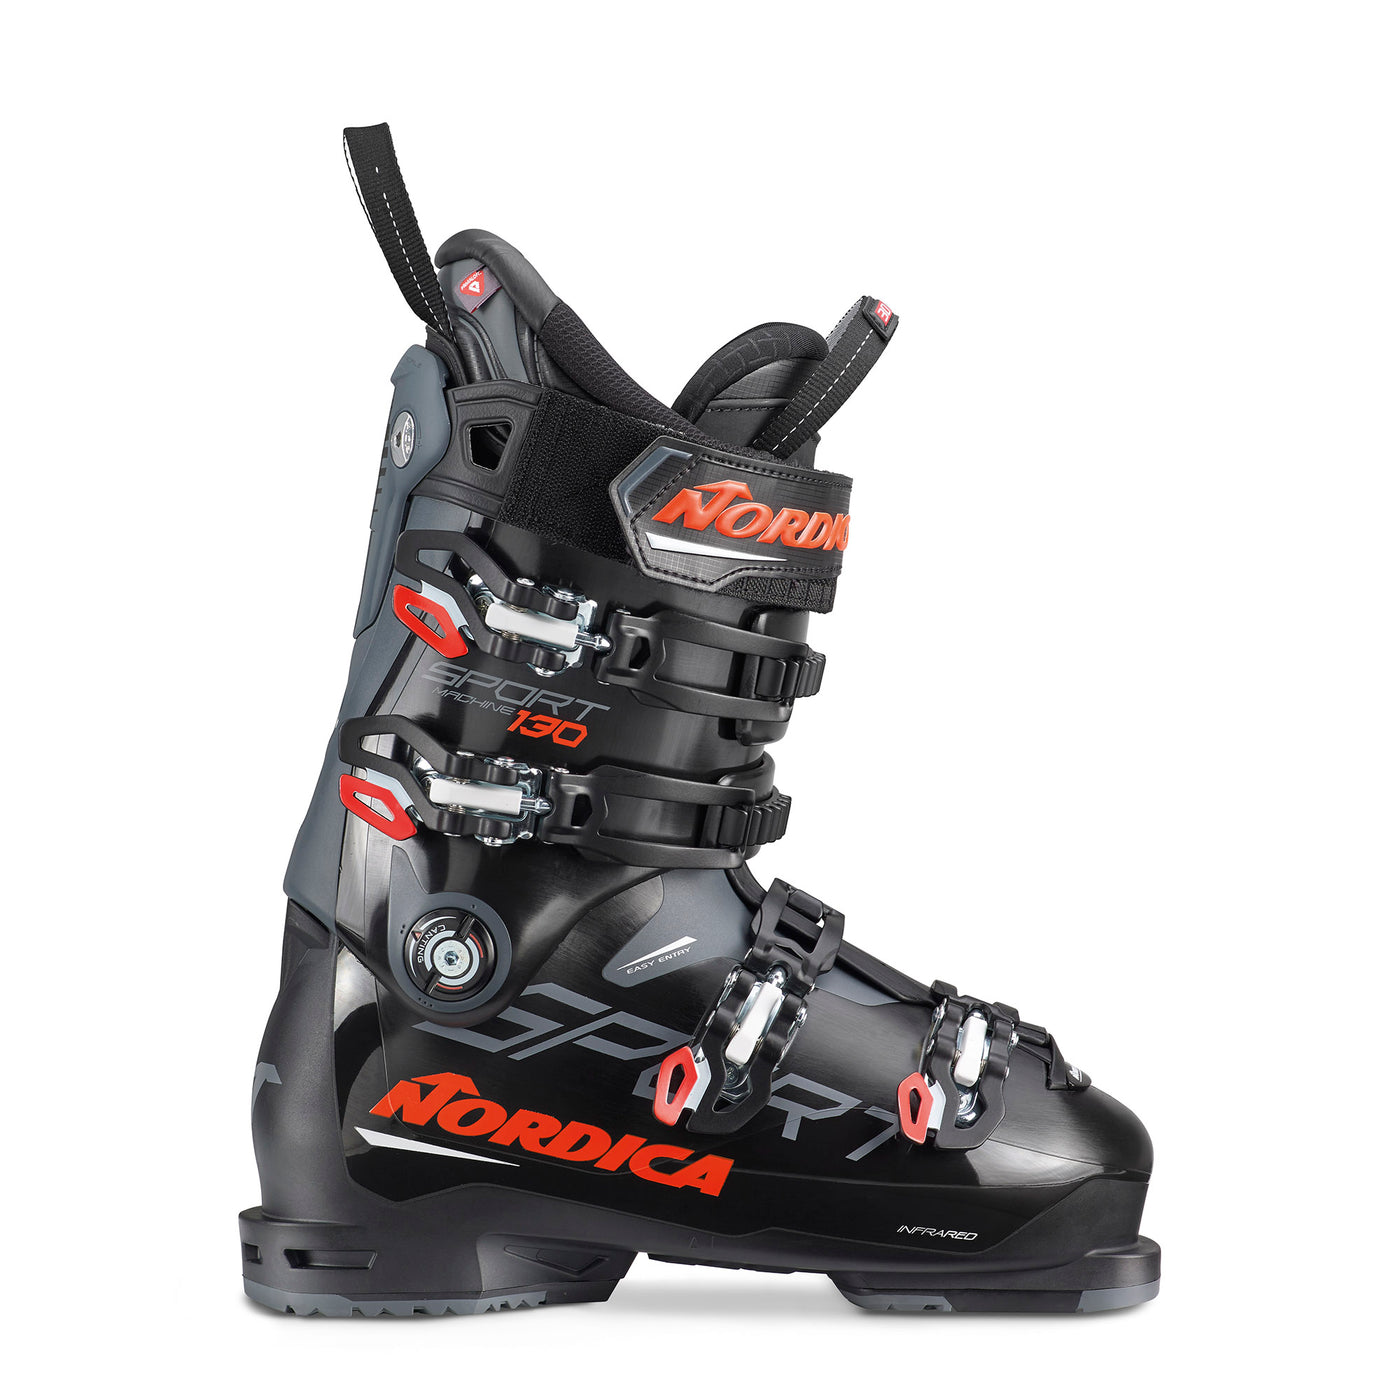 NORDICA SPORTMACHINE 130 - ProSkiGuy your Hometown Ski Shop on the web